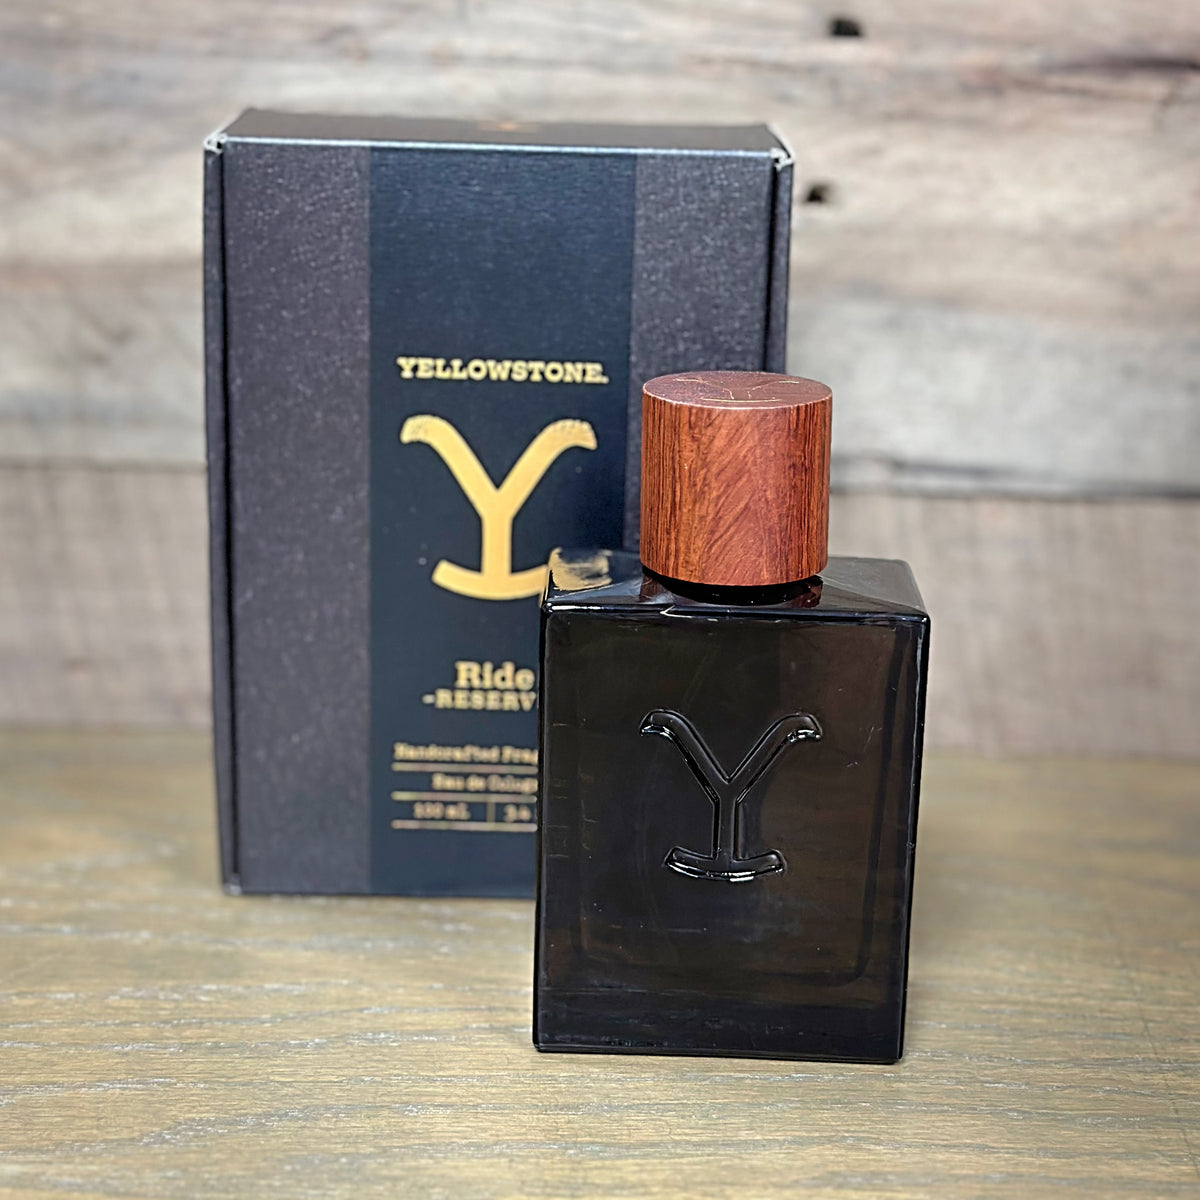 Yellowstone Ride Reserve Cologne Spray For Men